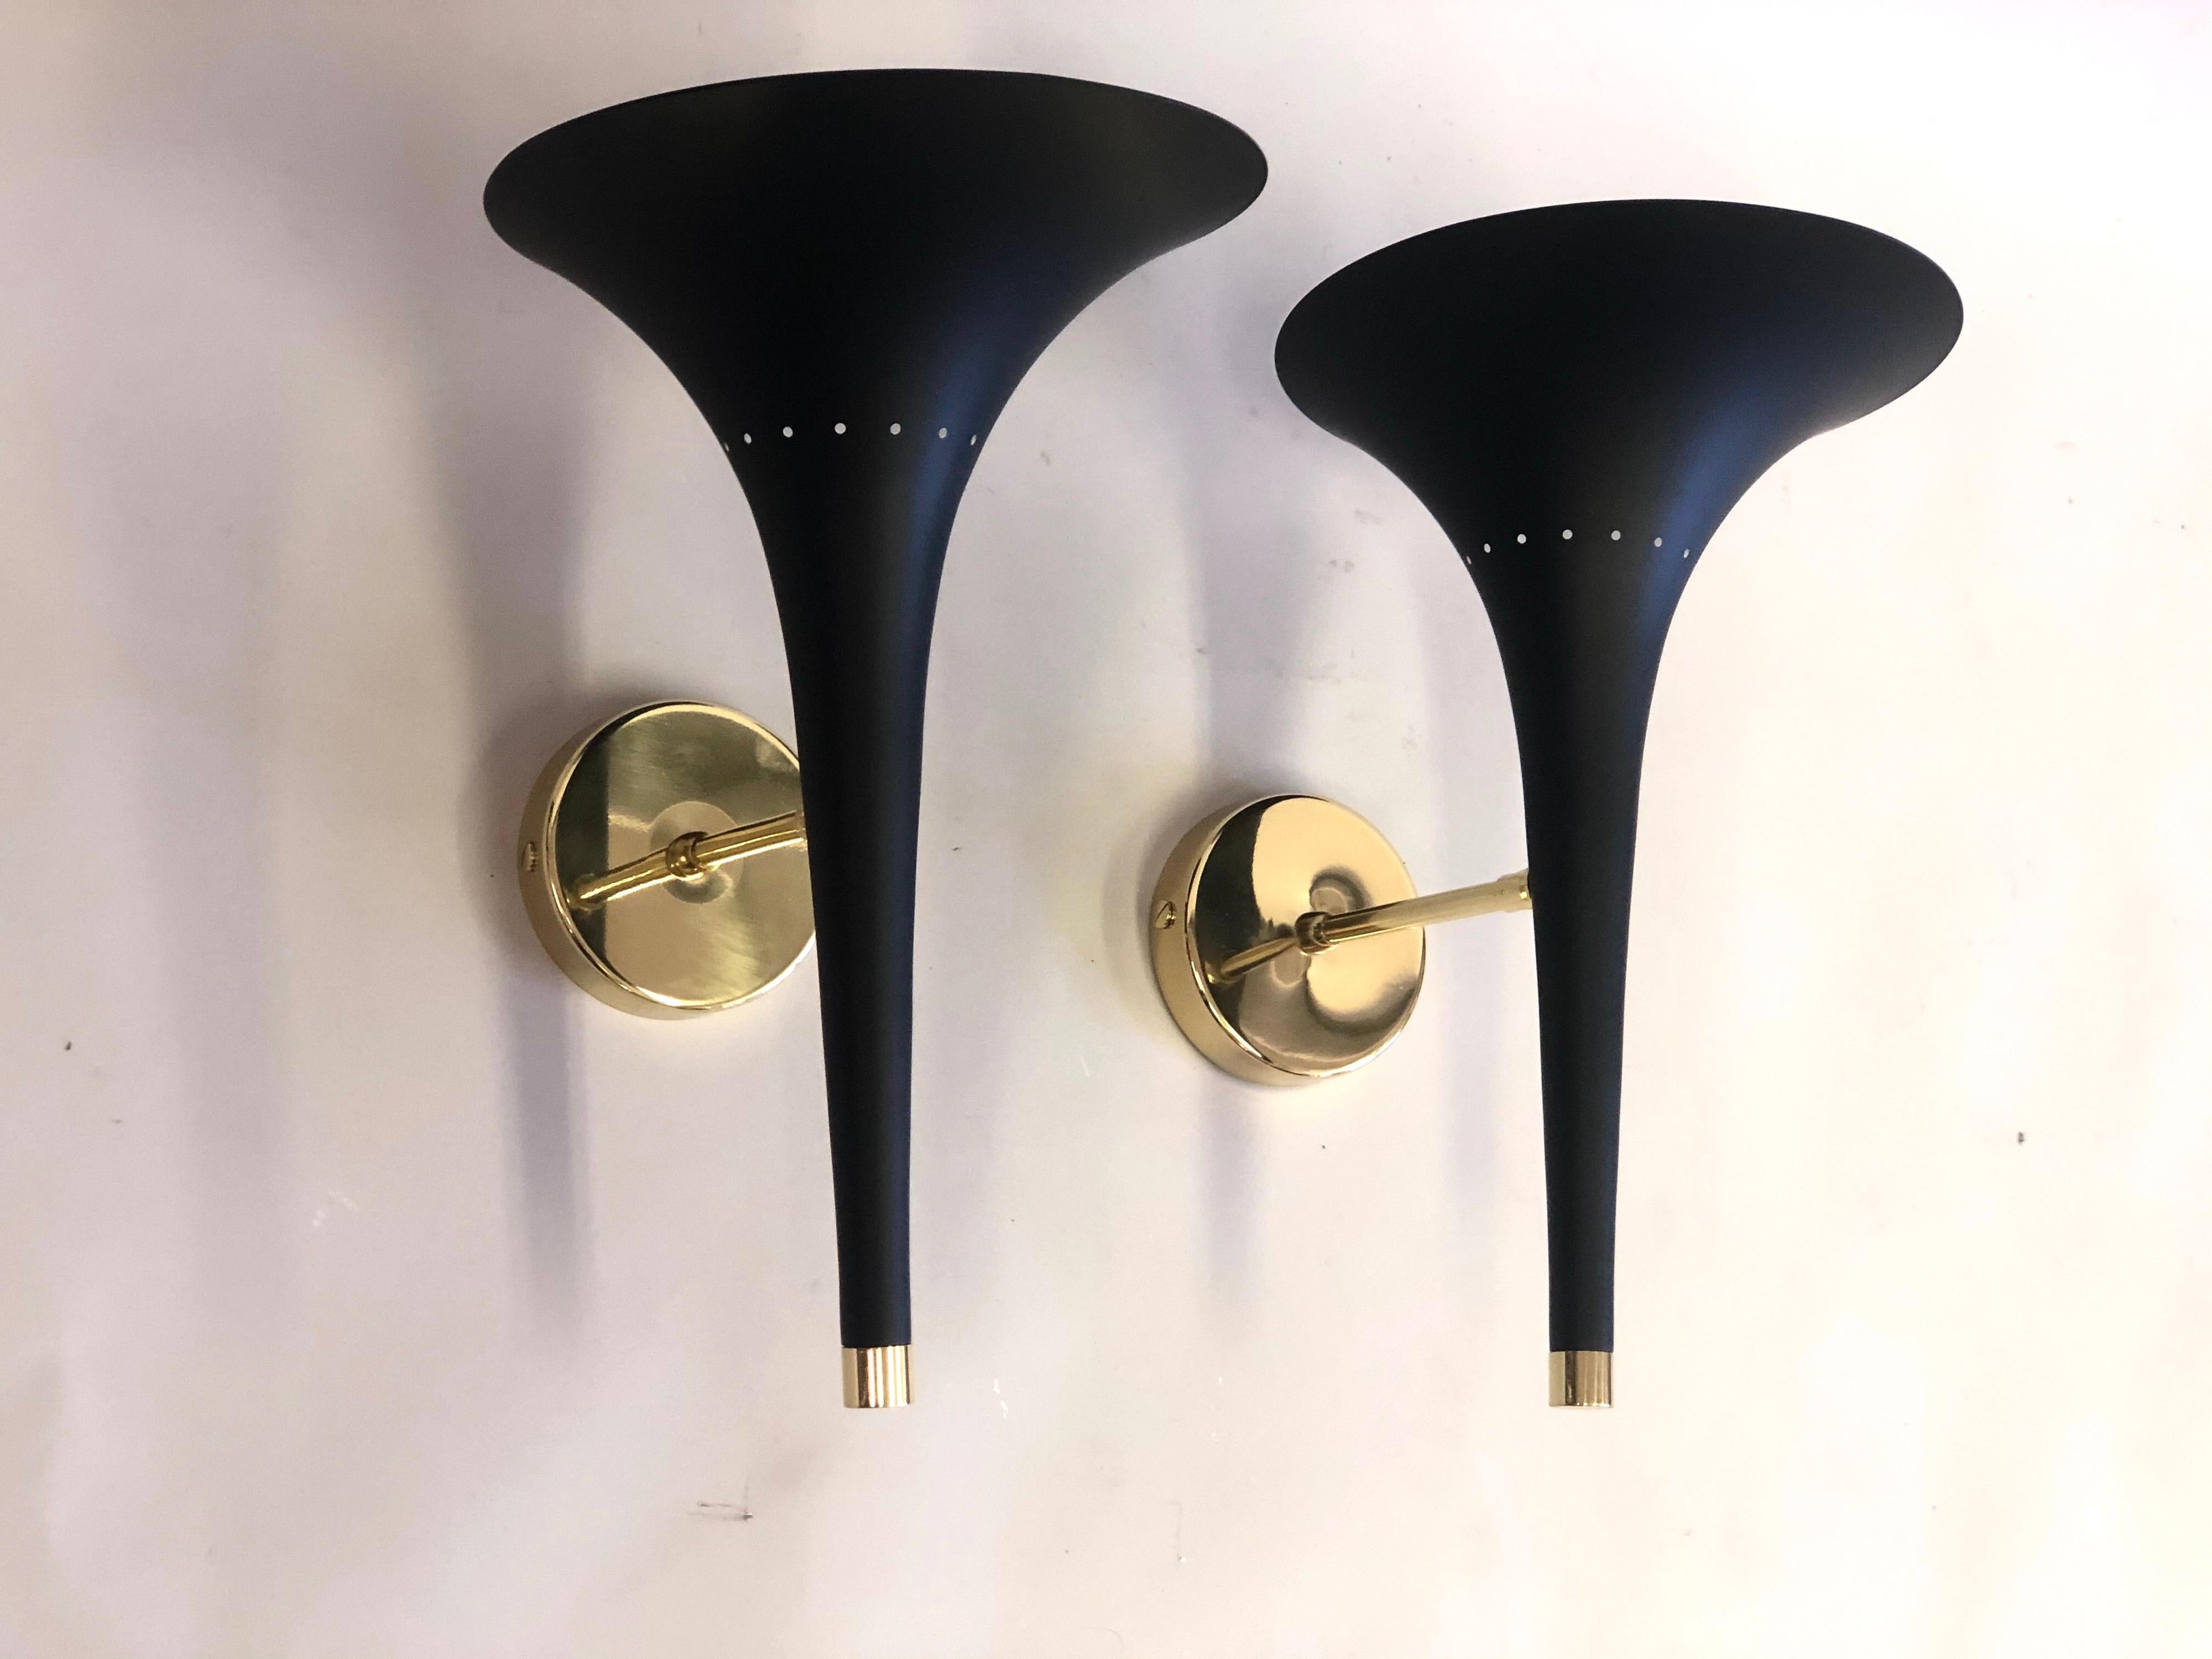 2 Pairs of Italian Mid-Century Modern black enameled metal and brass wall lights attributed to Stilnovo. The black enameled metal reflector is delicately tapered ending in a flared oval form from which light is emitted. 1 Candelabra socket.
The